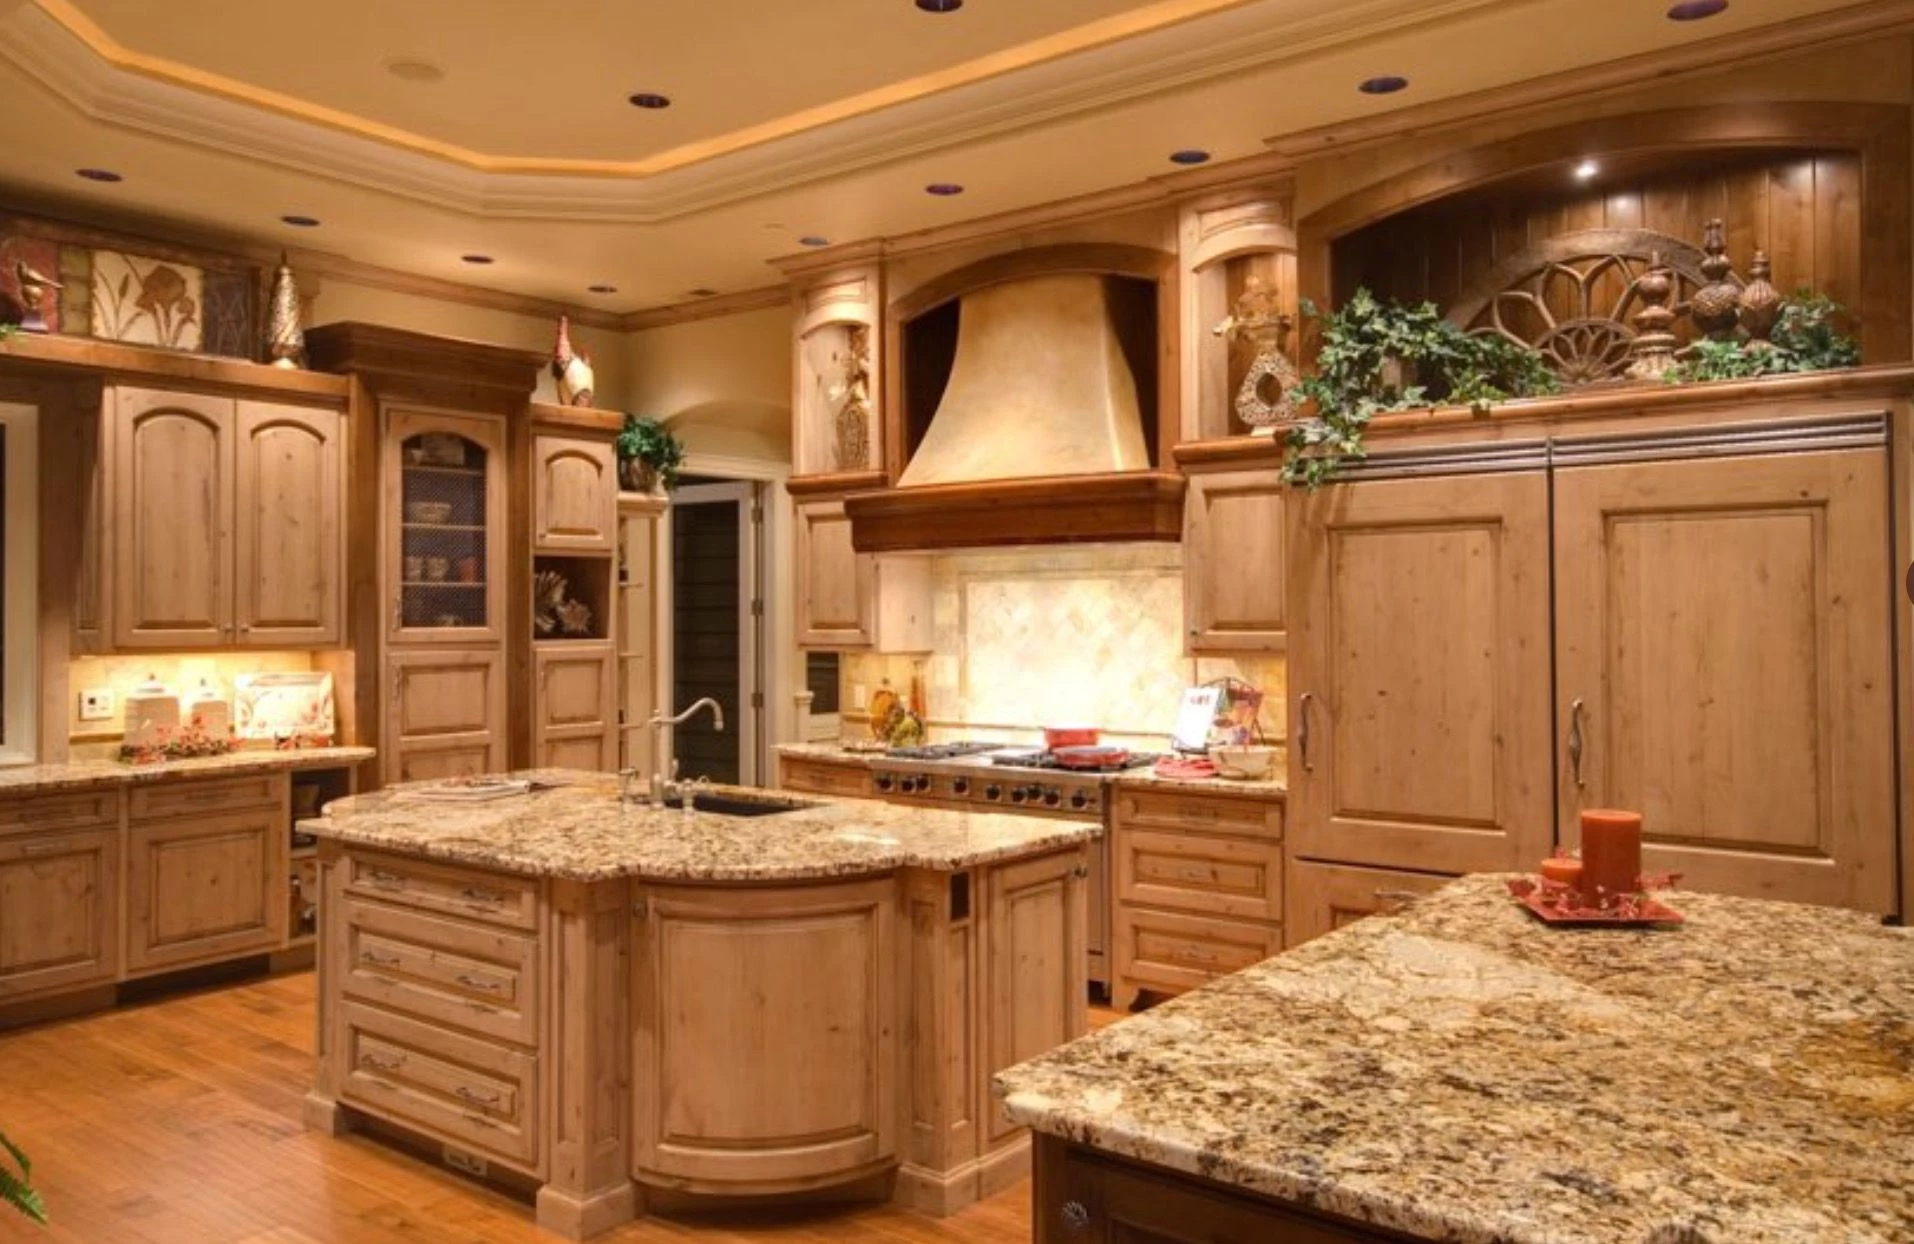 Did Every NJ Kitchen Have This Tuscan Look in the Early 2000s?